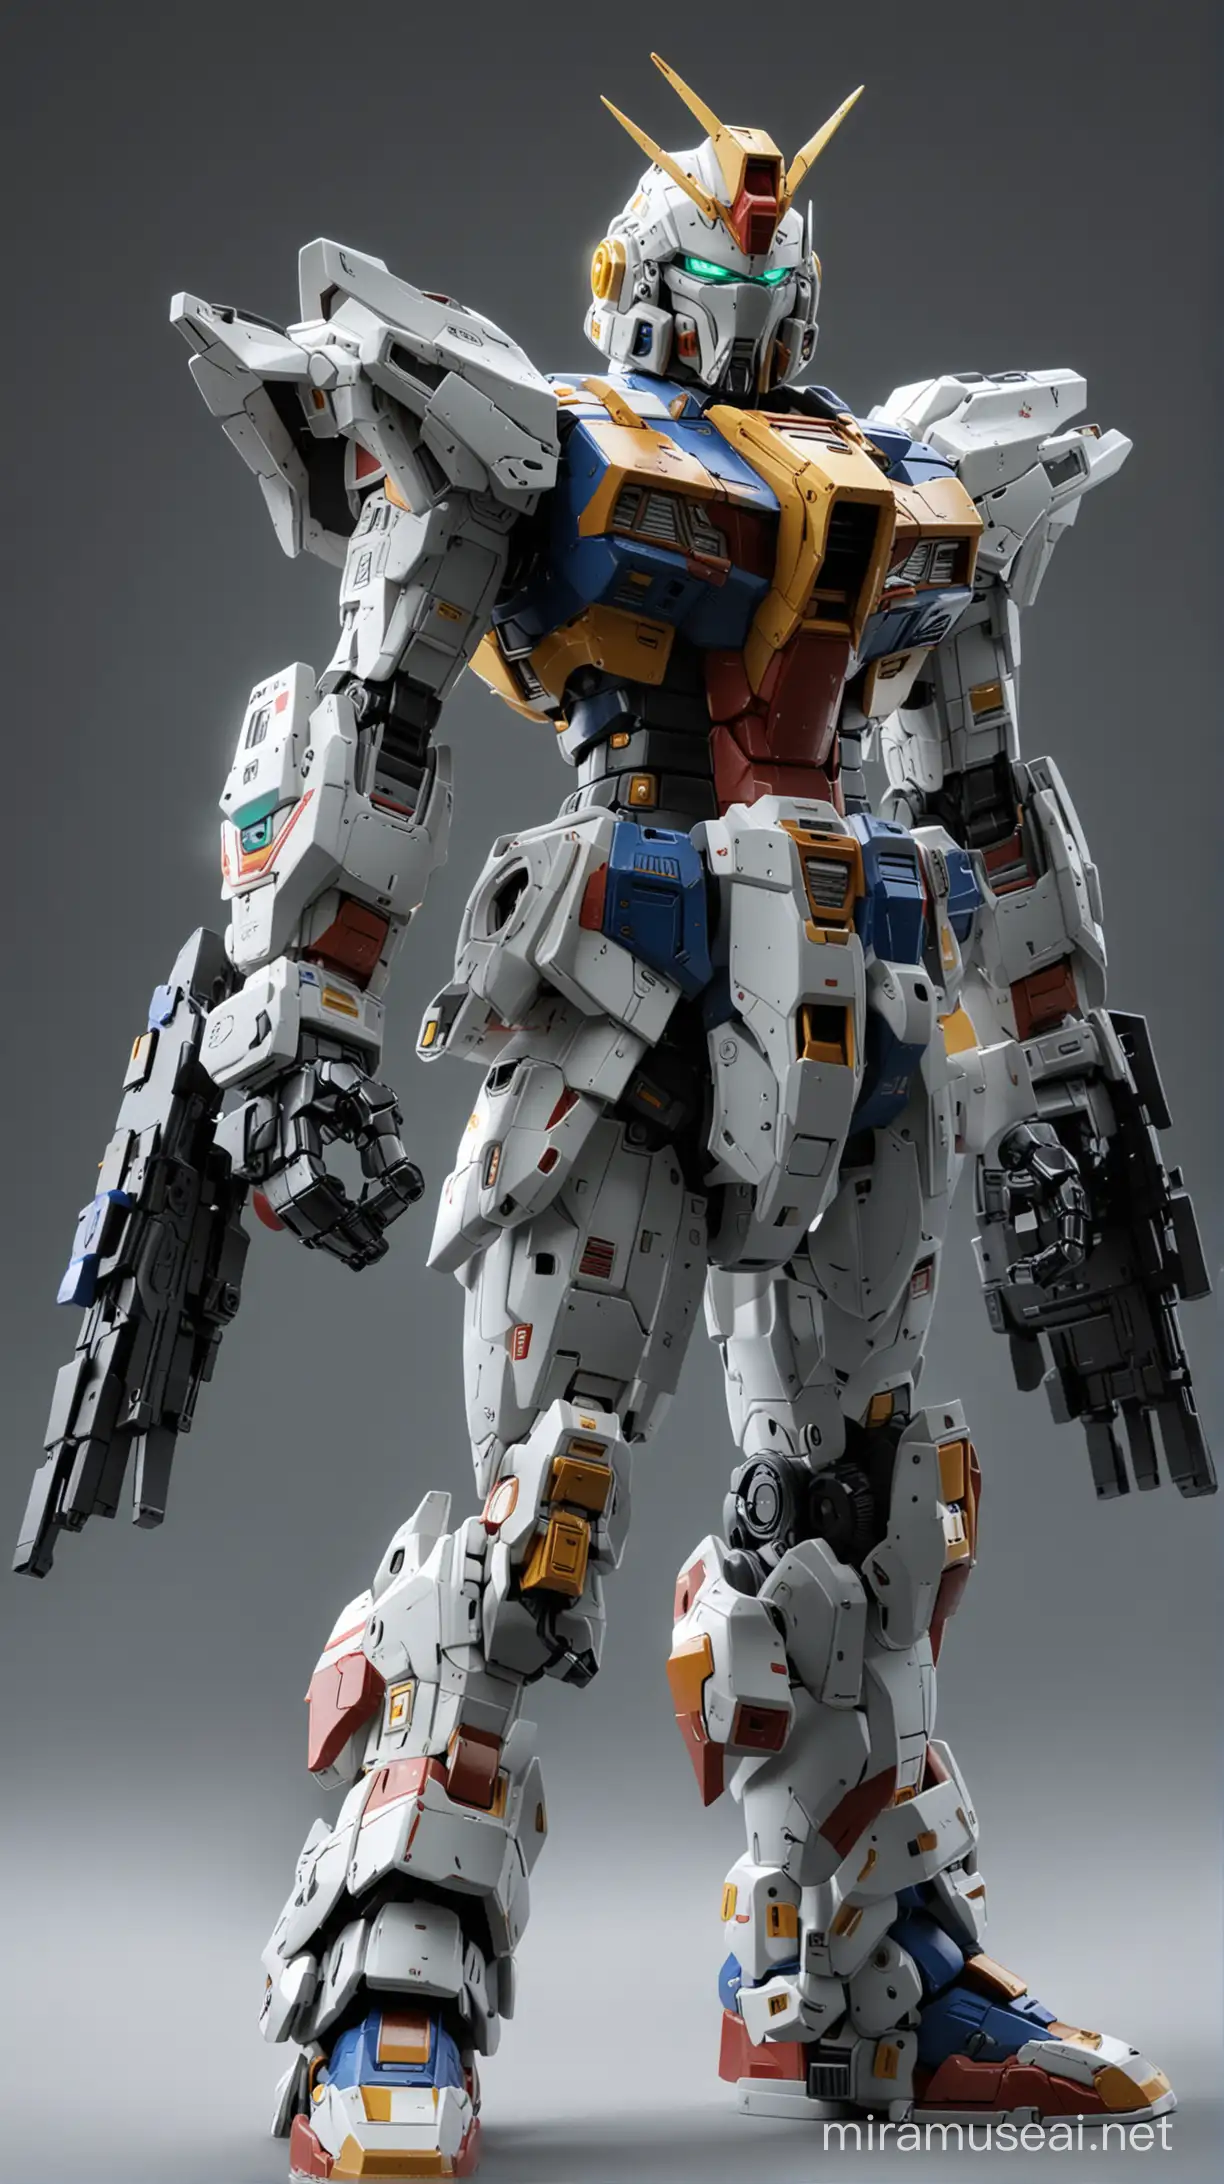 Dynamic 4D Realistic Gundam Action Figure with Enhanced Lighting and Shadows